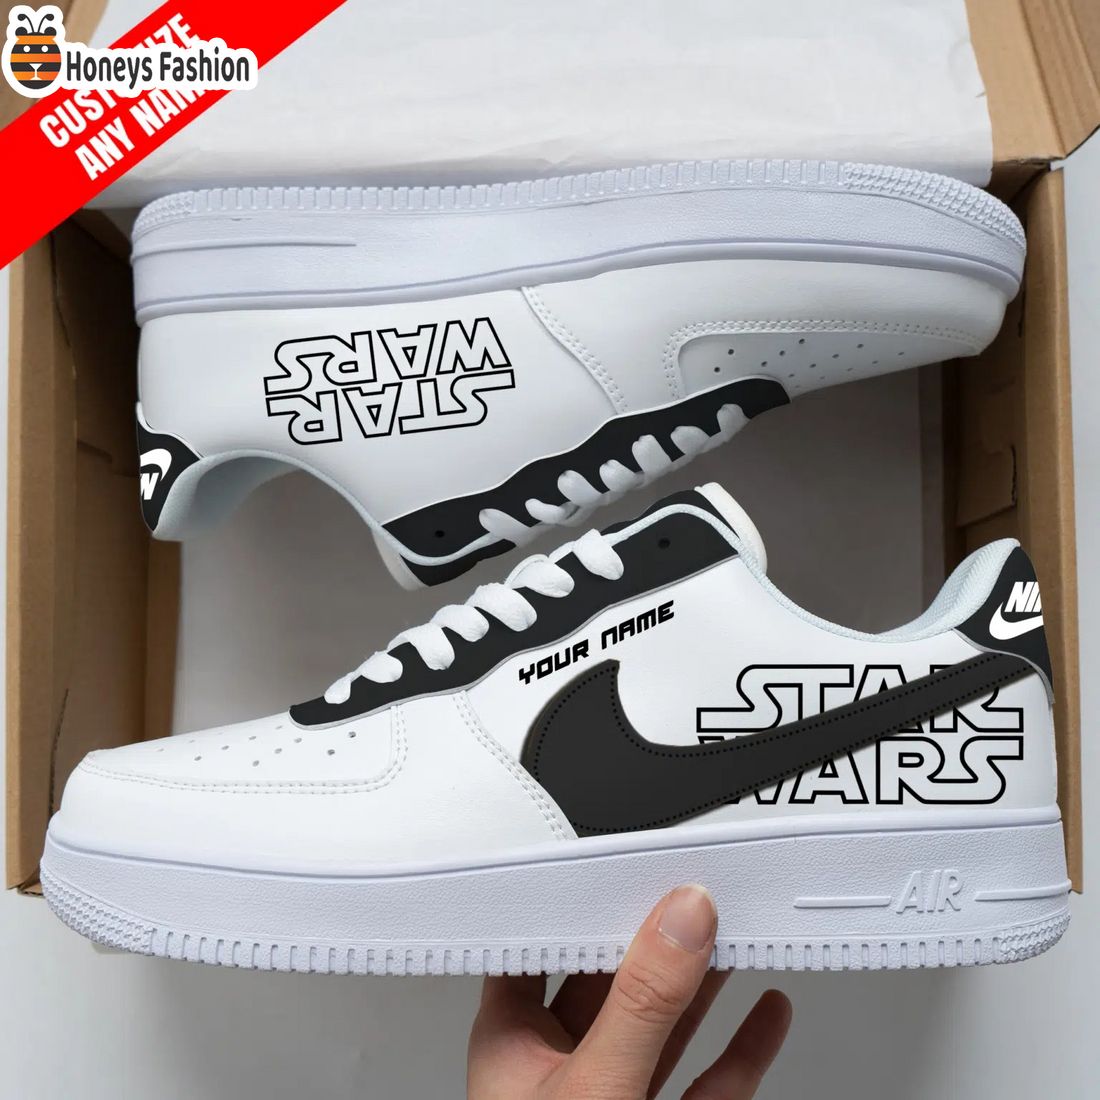 Star Wars Personalized Nike Air Force Sneakers